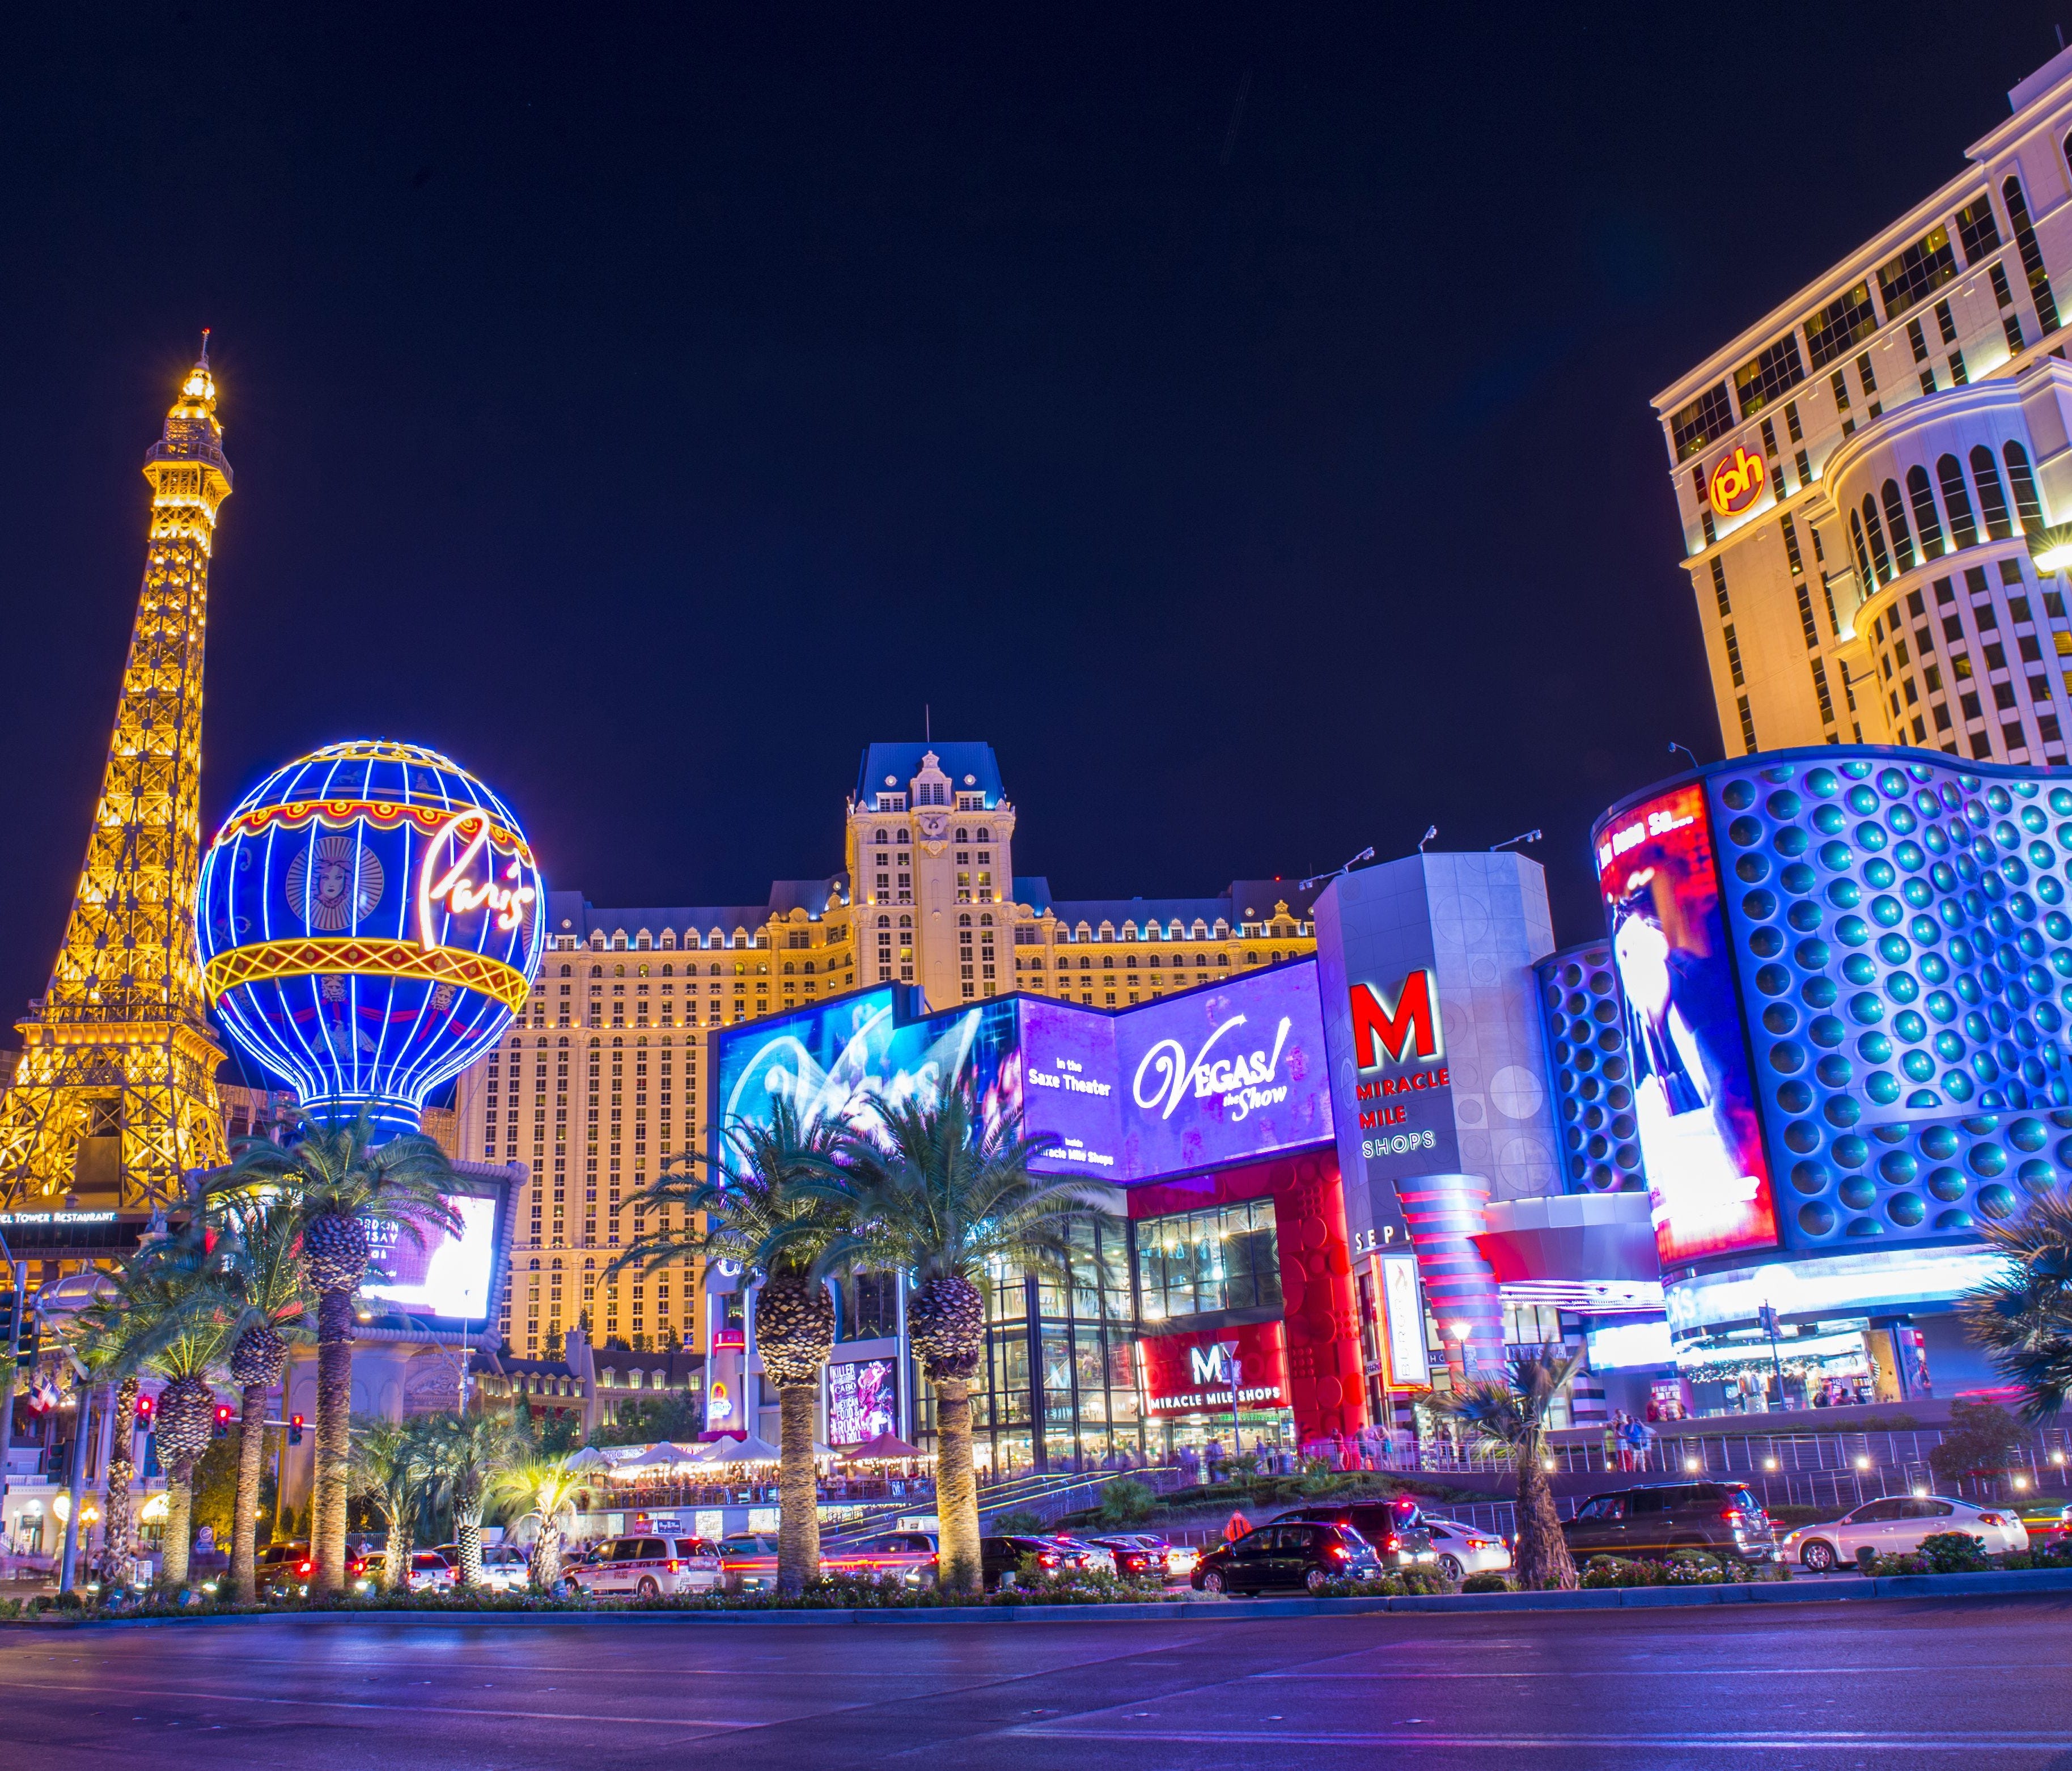 Las Vegas ranks third for the most bookings made on Valentine's Day. HotelTonight says the Hard Rock Hotel & Casino is its most booked hotel for the holiday.